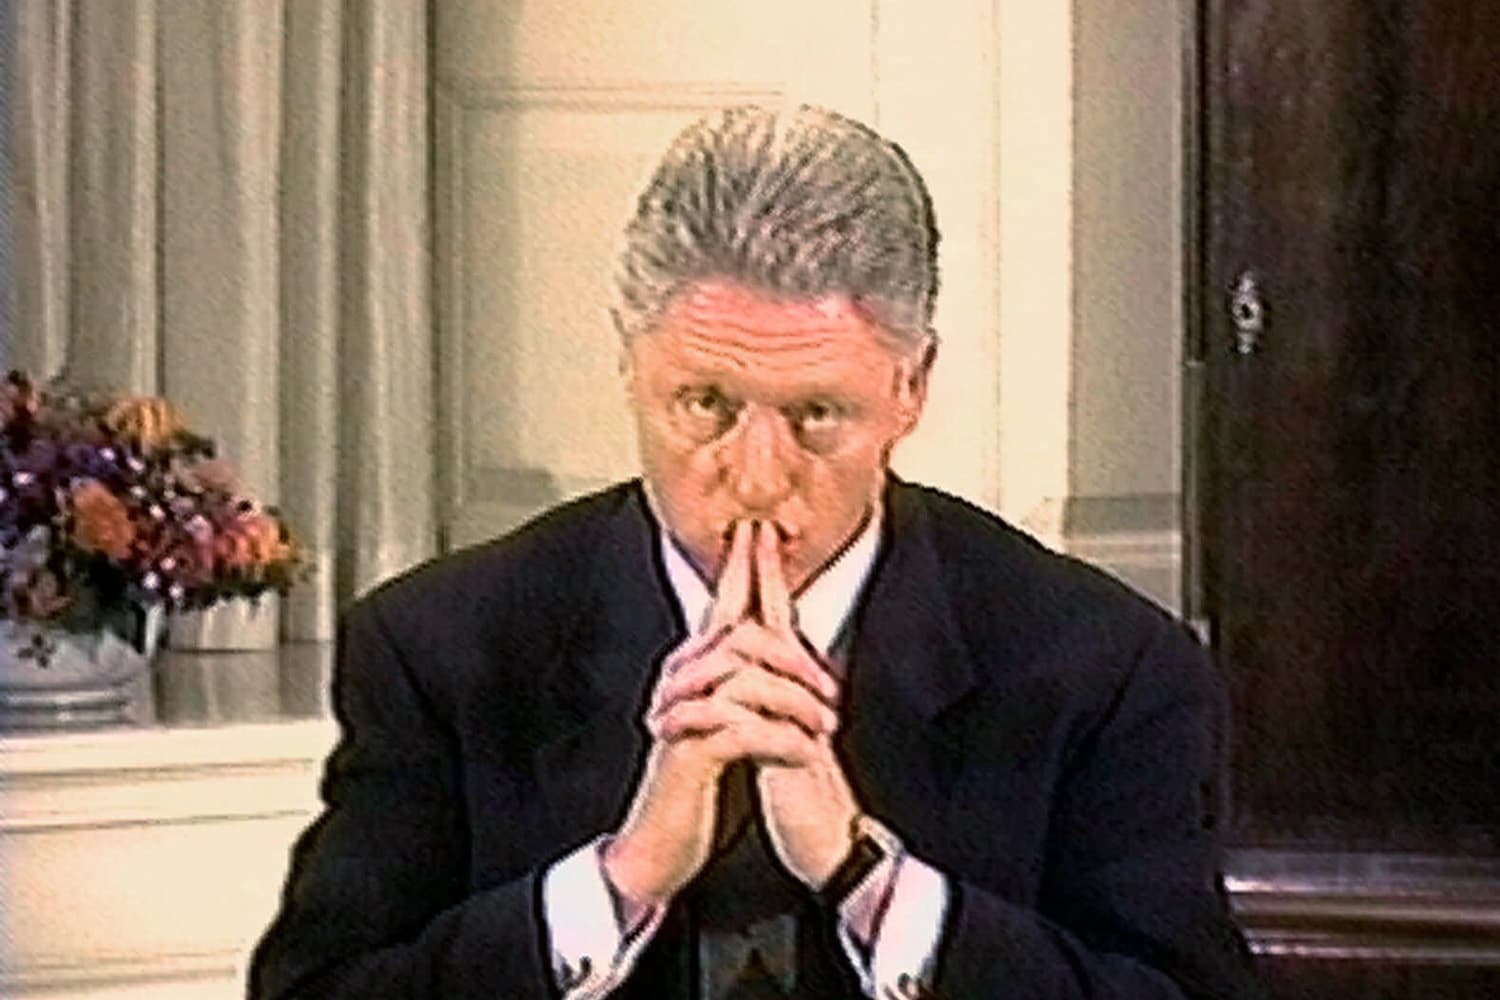 President Bill Clinton is shown in this video image during his grand jury deposition Aug 17, 1998. (AP Photo/APTN)